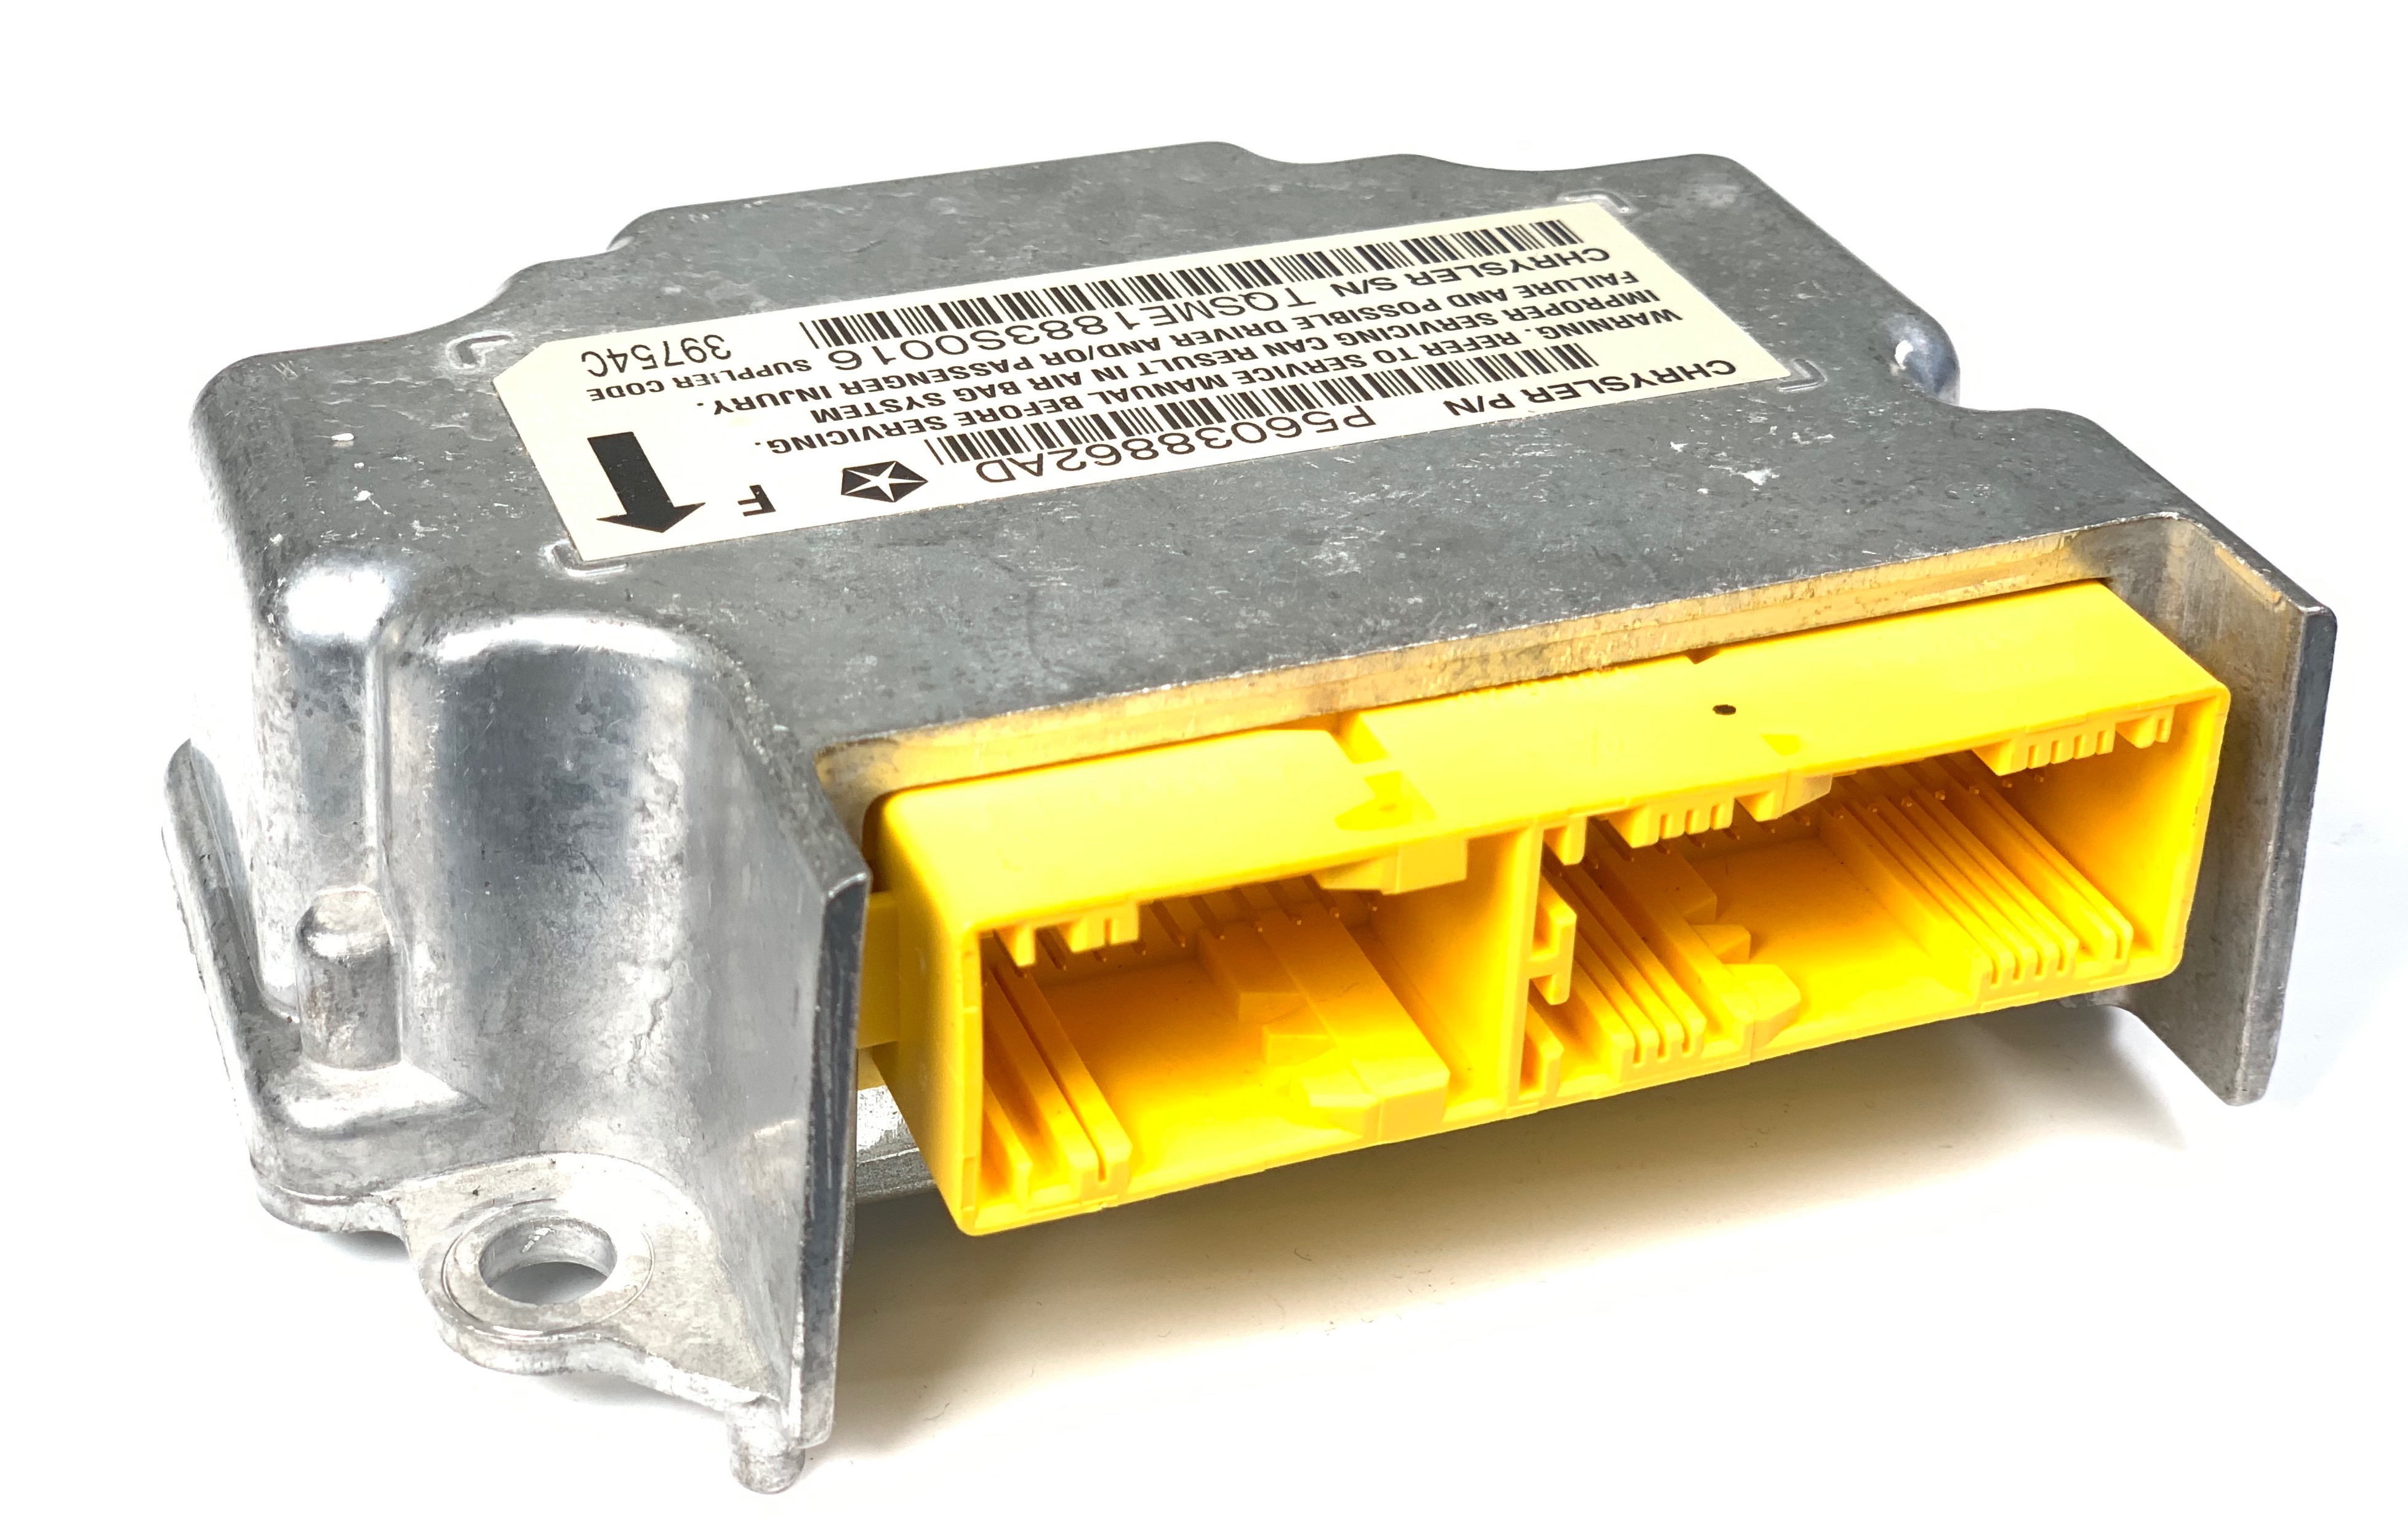 JEEP LIBERTY SRS ORC ORM Occupant Control Module - Airbag Computer Control Module PART #P56038862AD